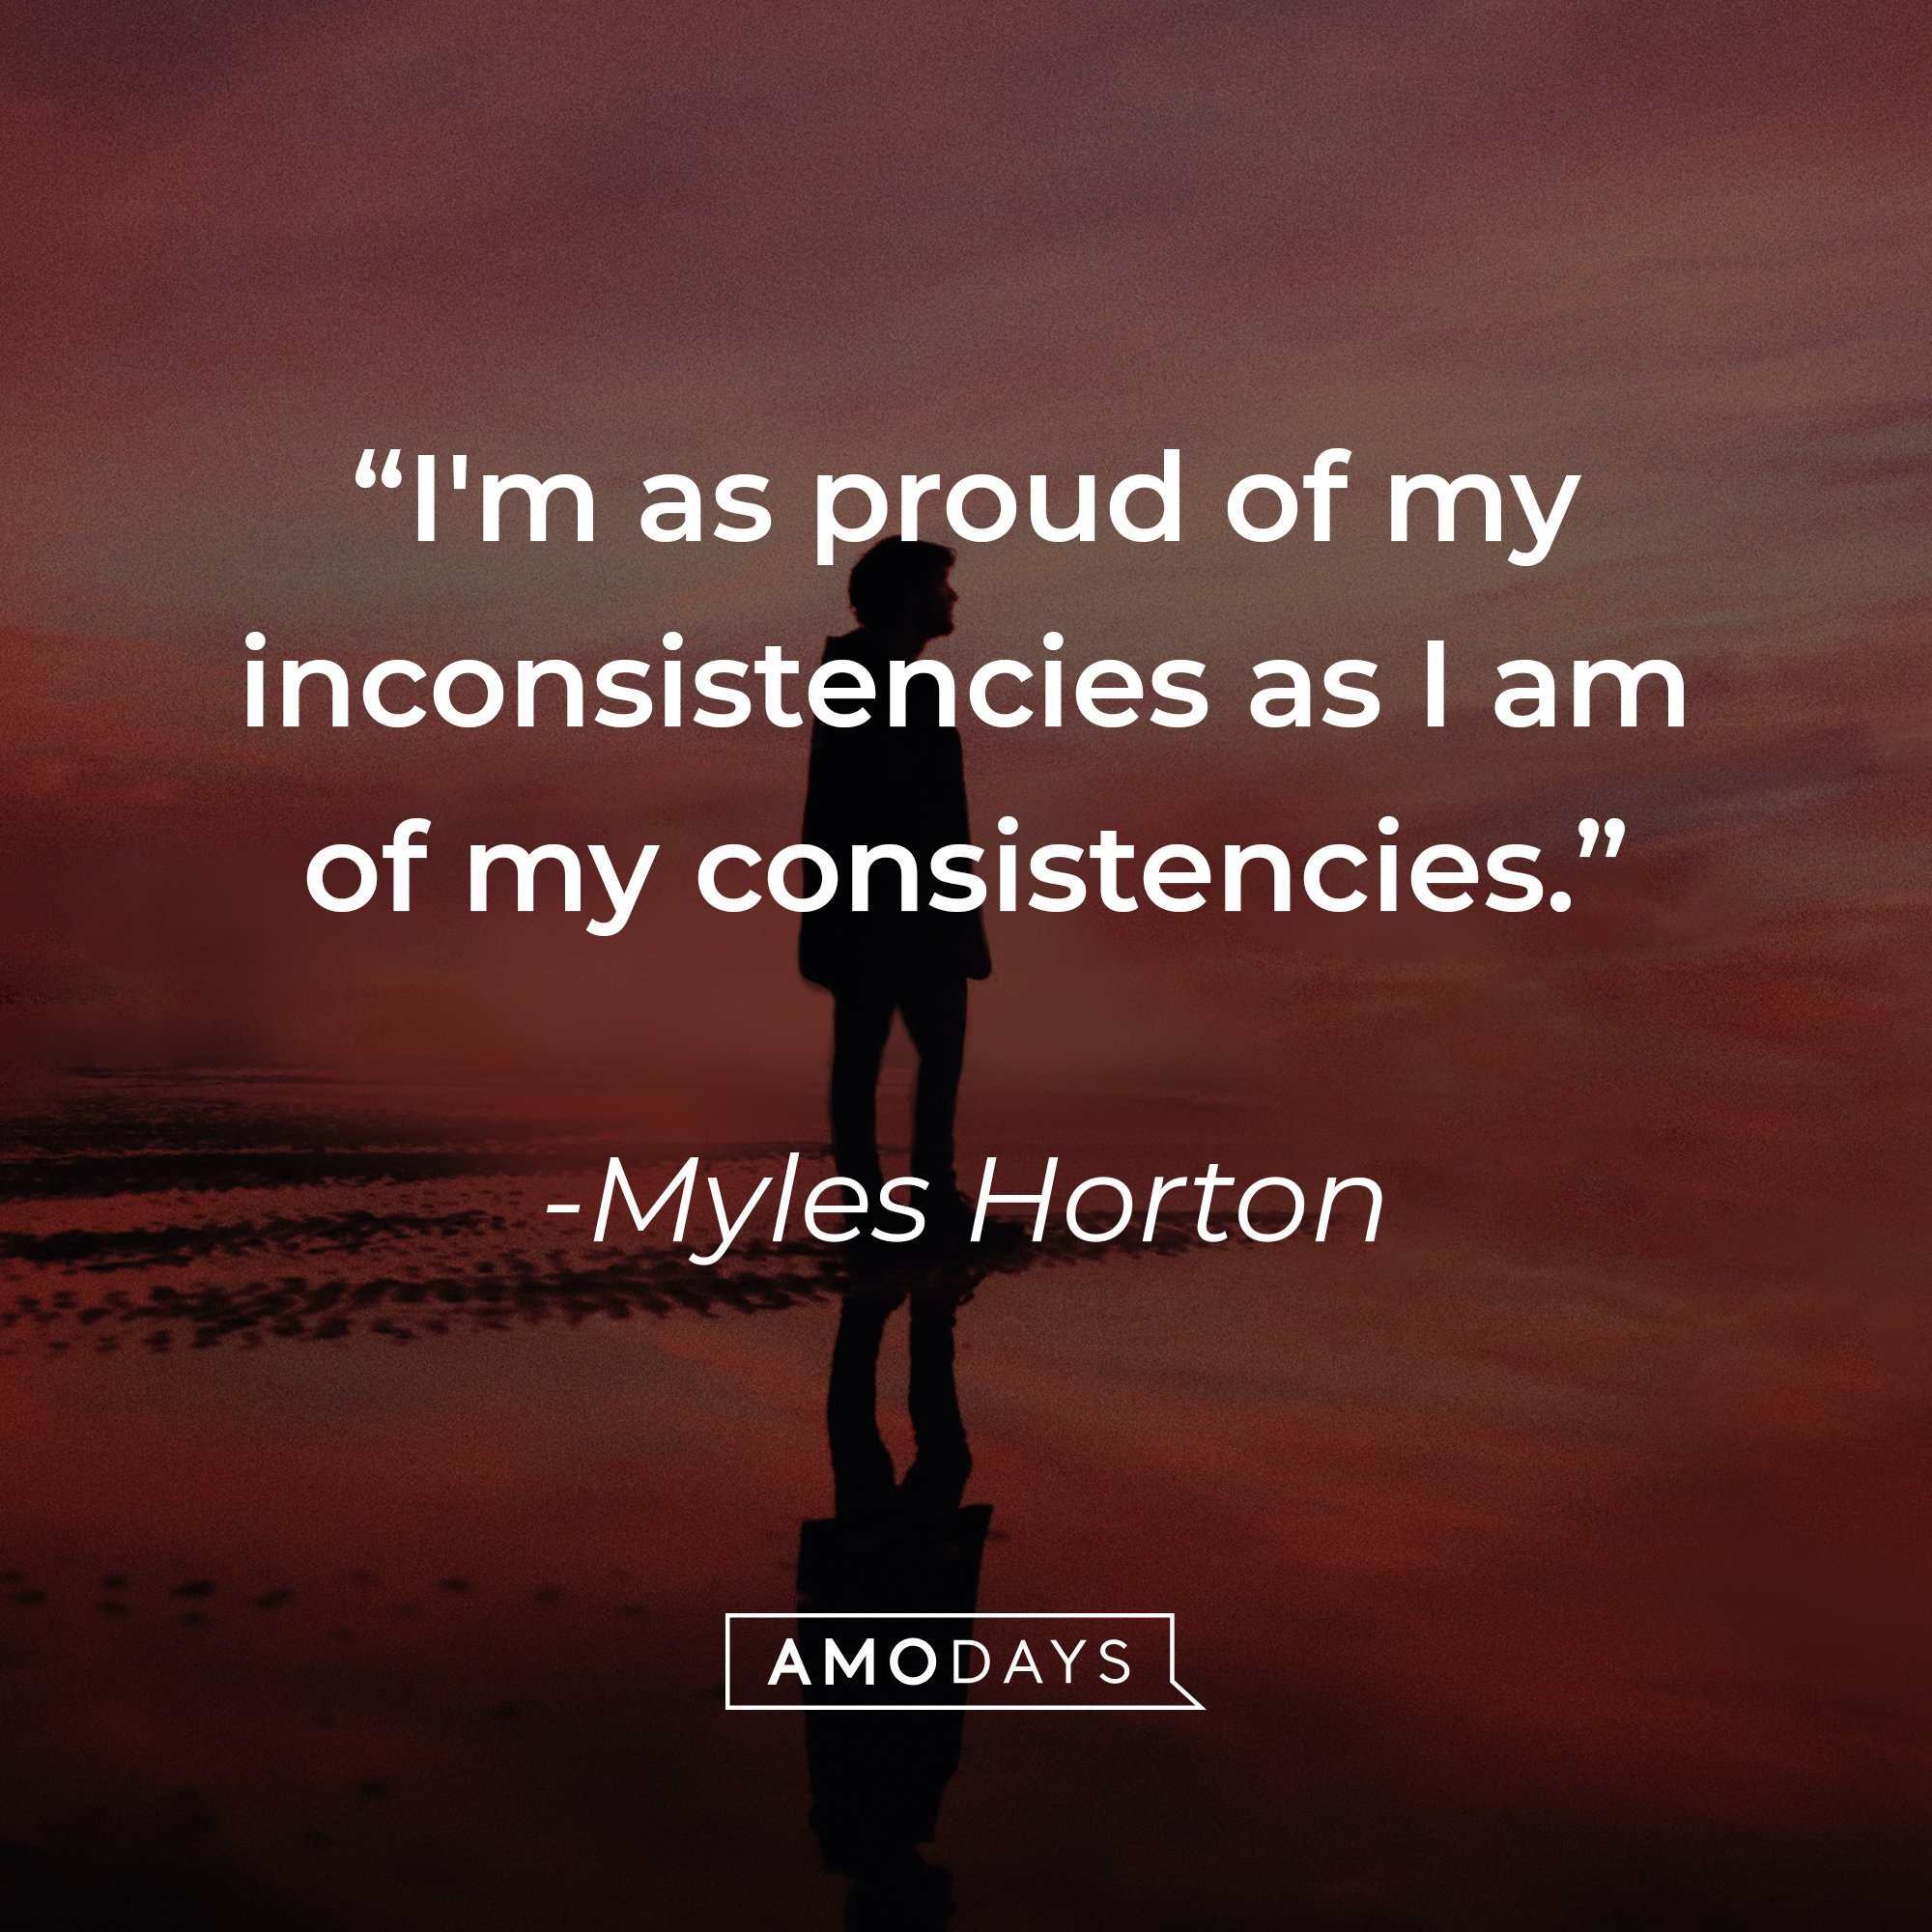 Myles Horton's quote: "I'm as proud of my inconsistencies as I am of my consistencies." | Image: AmoDays